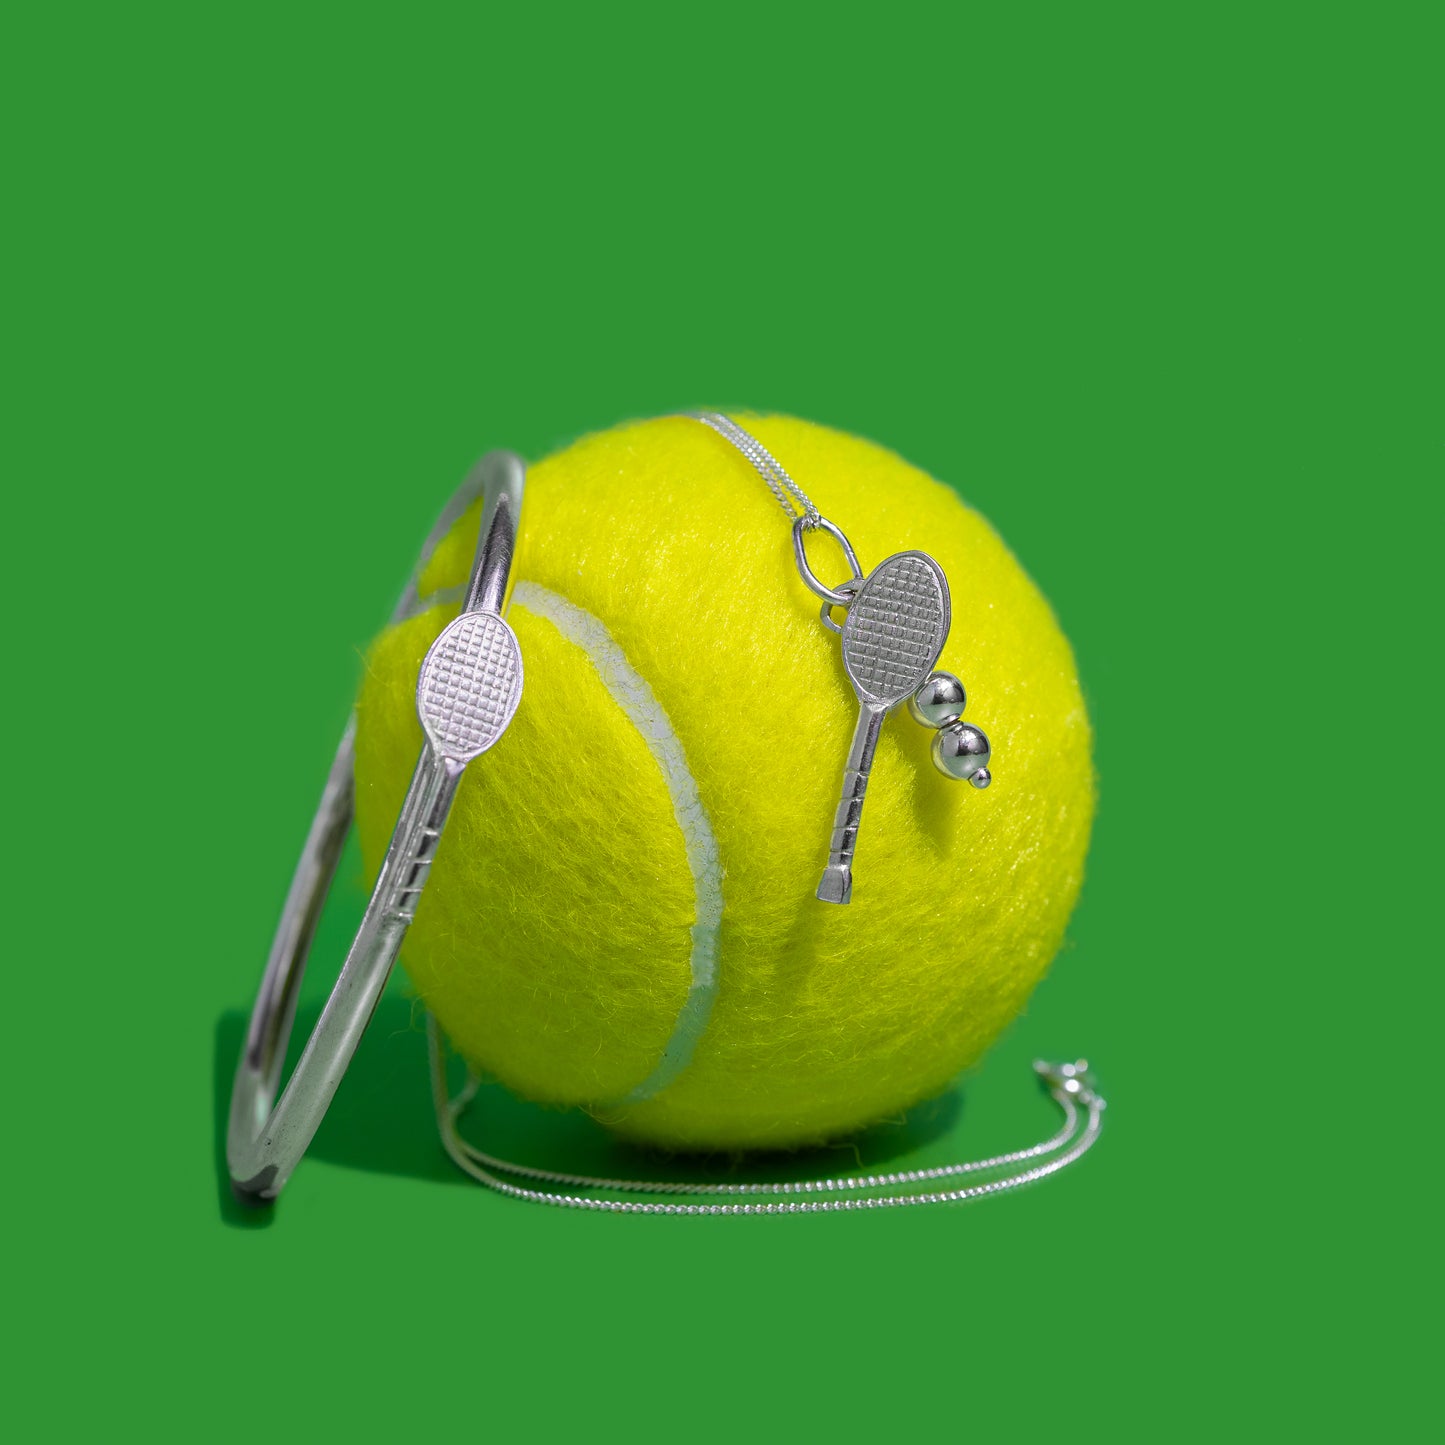 Sterling silver bangle and sterling silver tennis pendant on a green tennis ball with green background